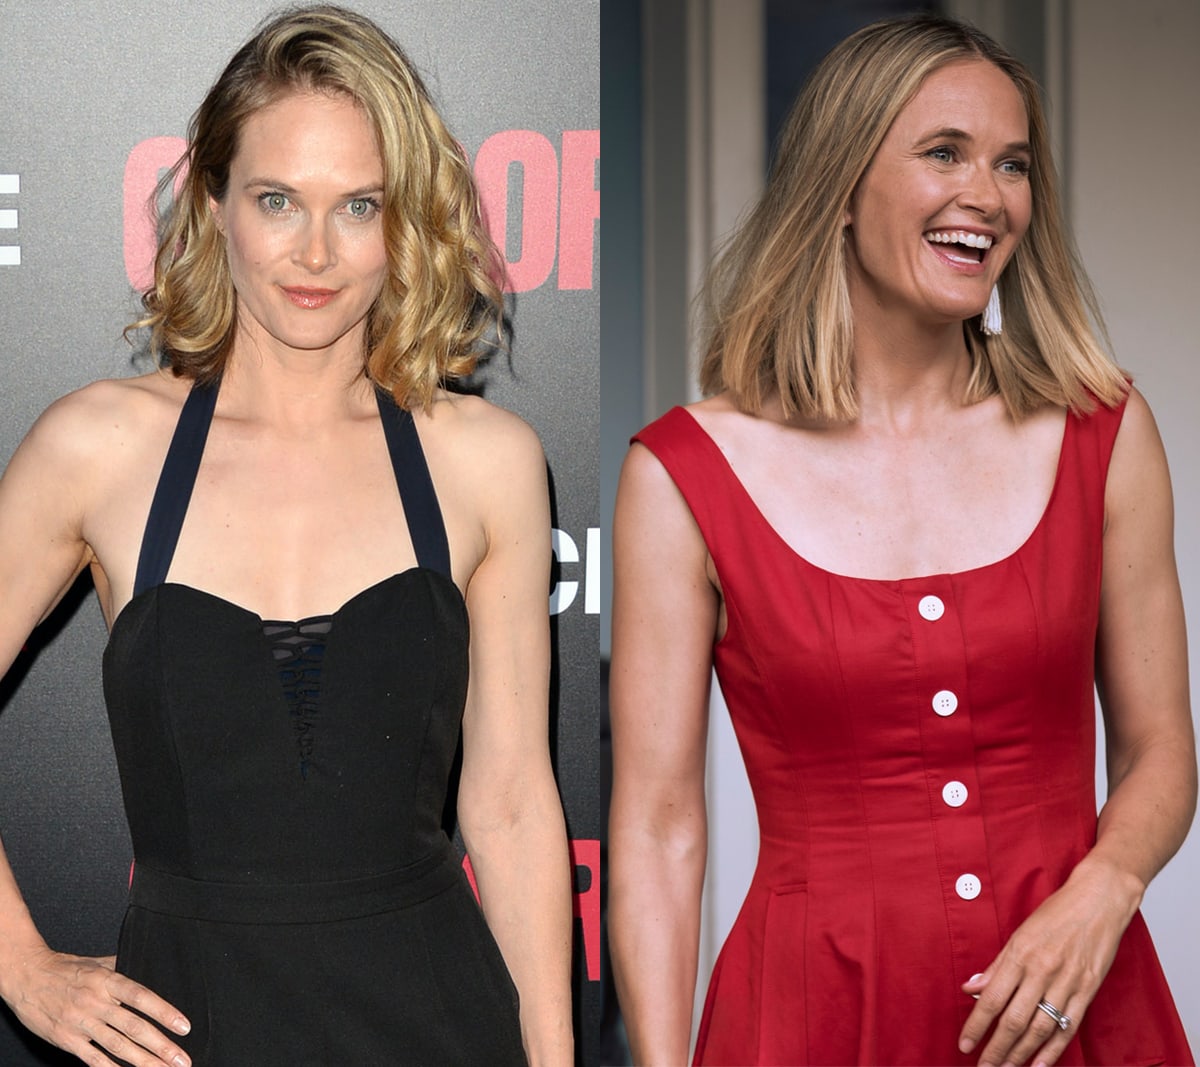 Canadian actress Rachel Blanchard is back on the small screen as Susannah Fisher in The Summer I Turned Pretty following her role as Emma in the comedy-drama You Me Her